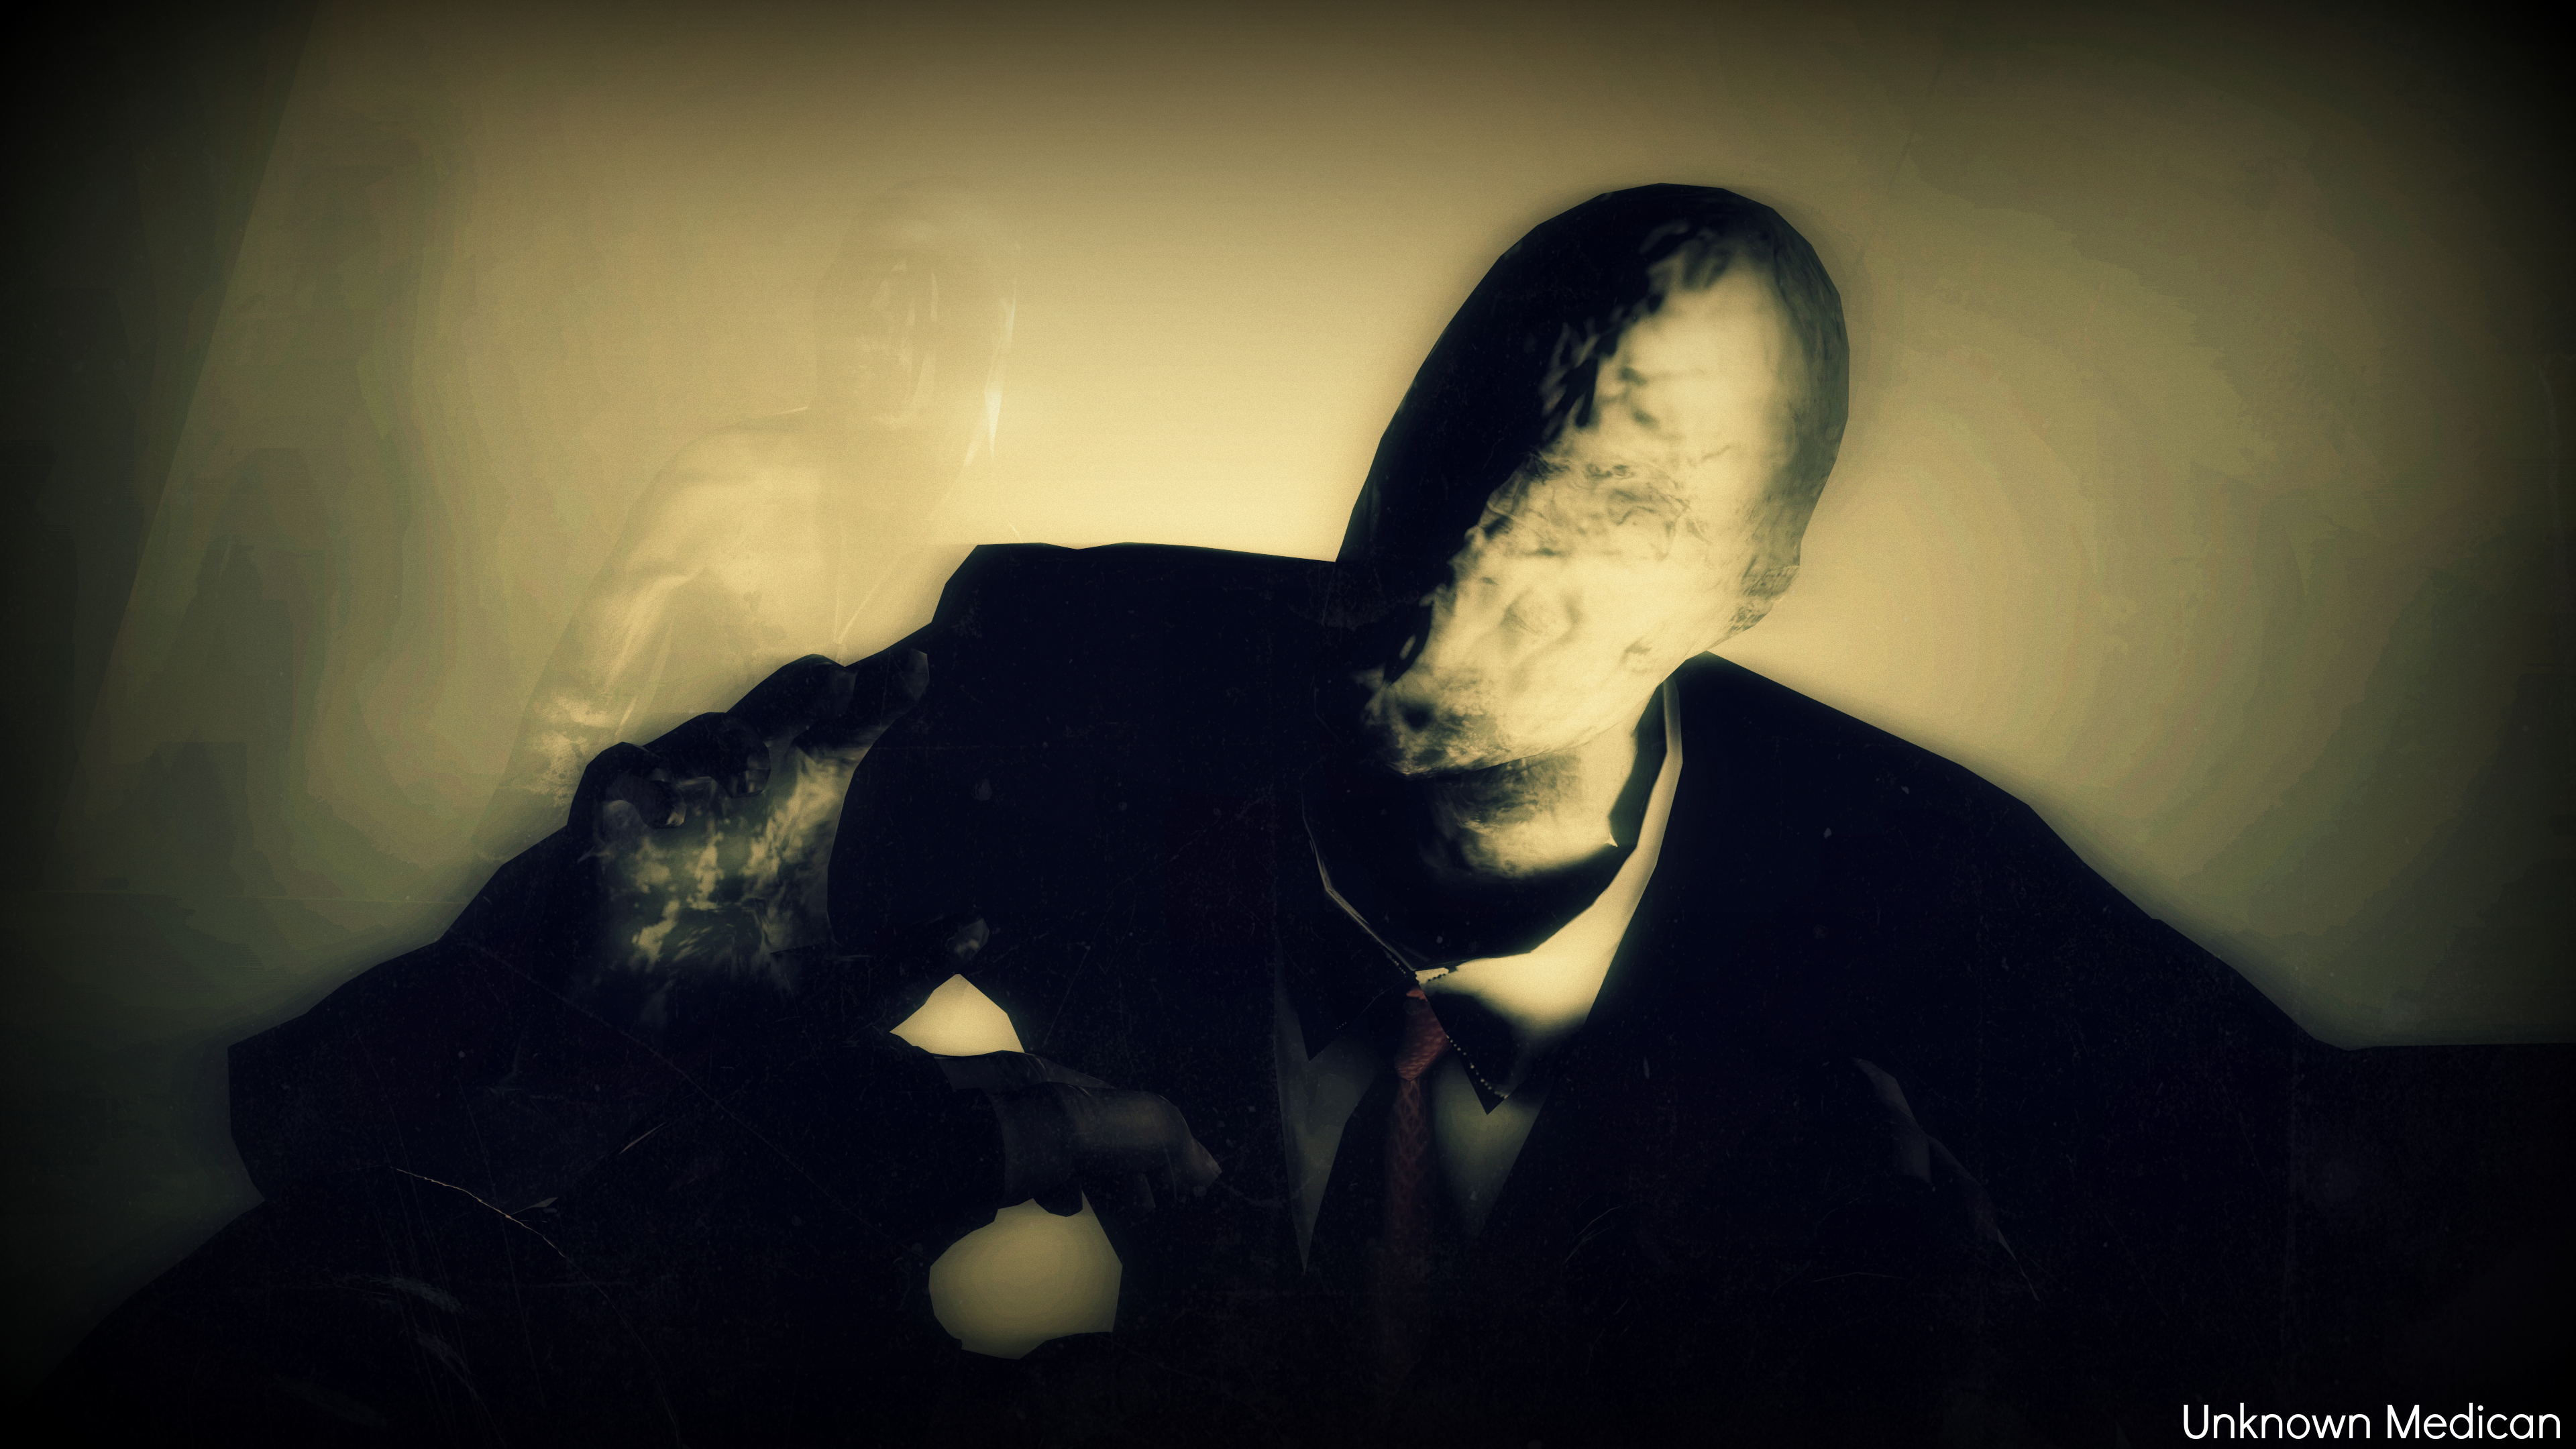 slender the arrival steam download free